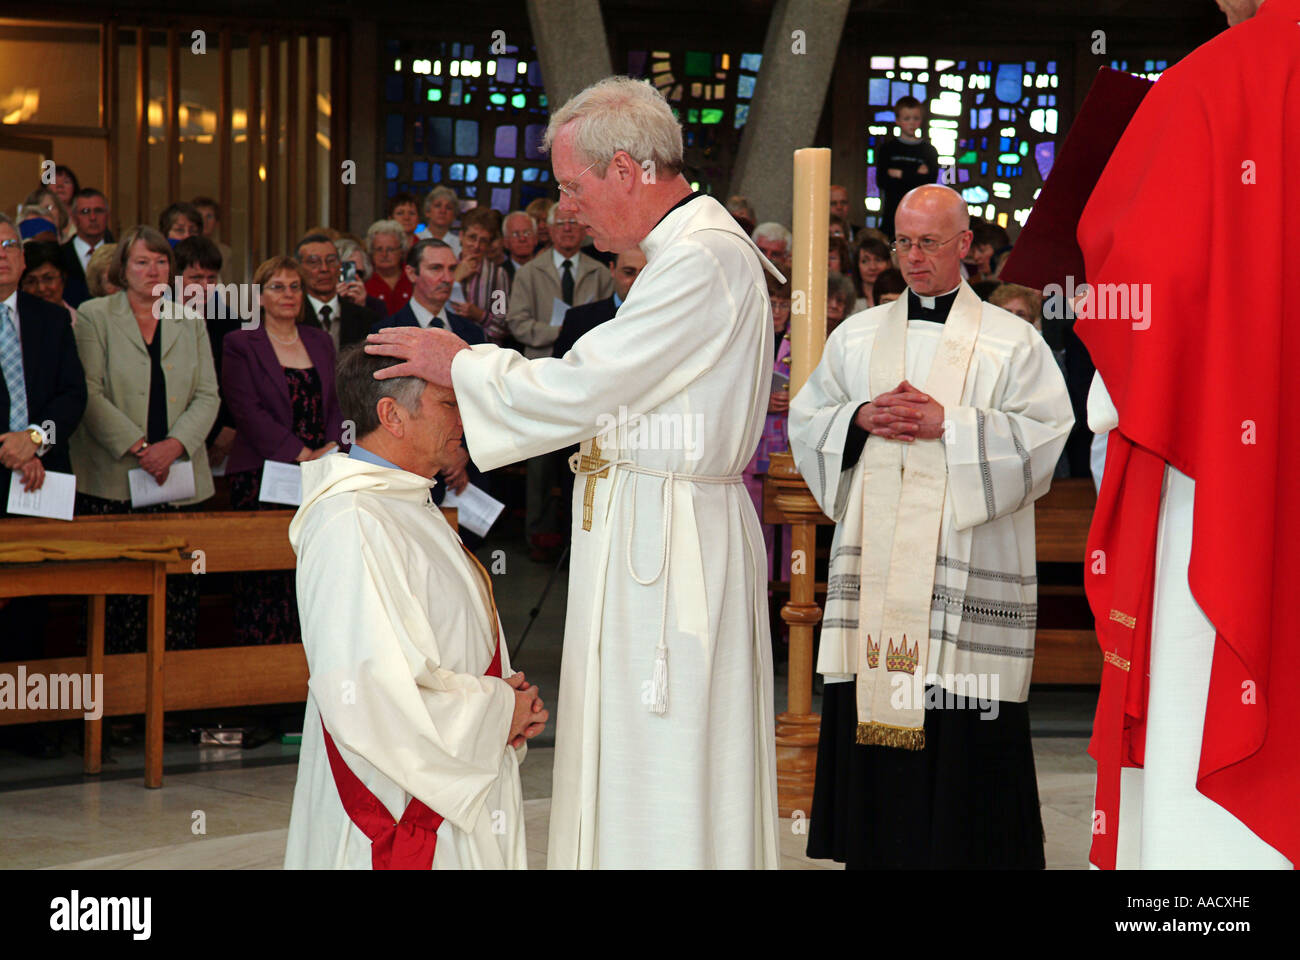 Ordination of a catholic priest in St Mary's church in Leyland - UK Stock Photo